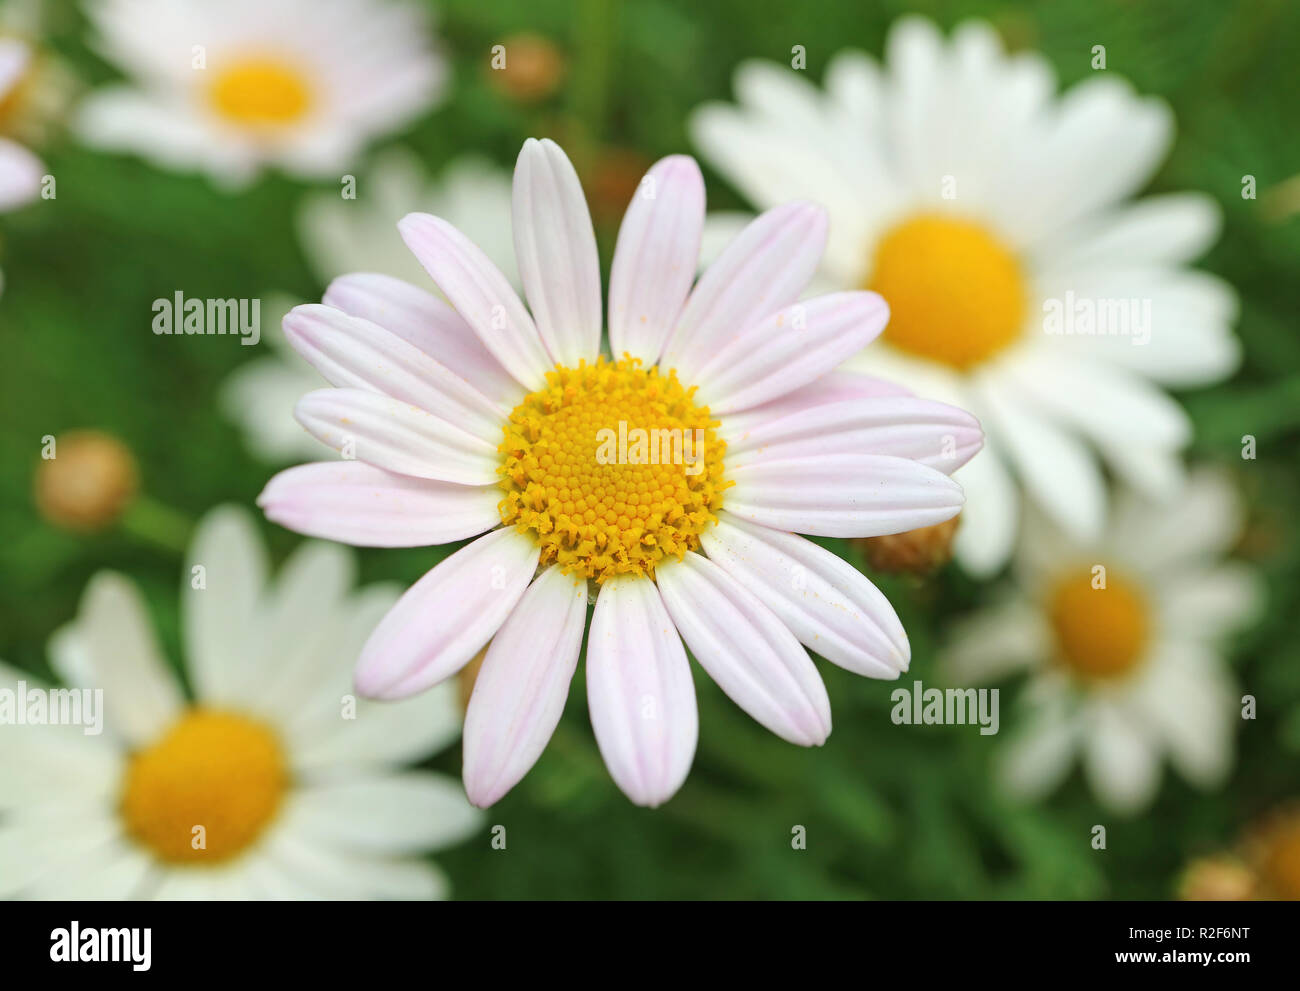 Closed Up Pale Pink Daisy Flower with Blurred White Daisies in Background Stock Photo